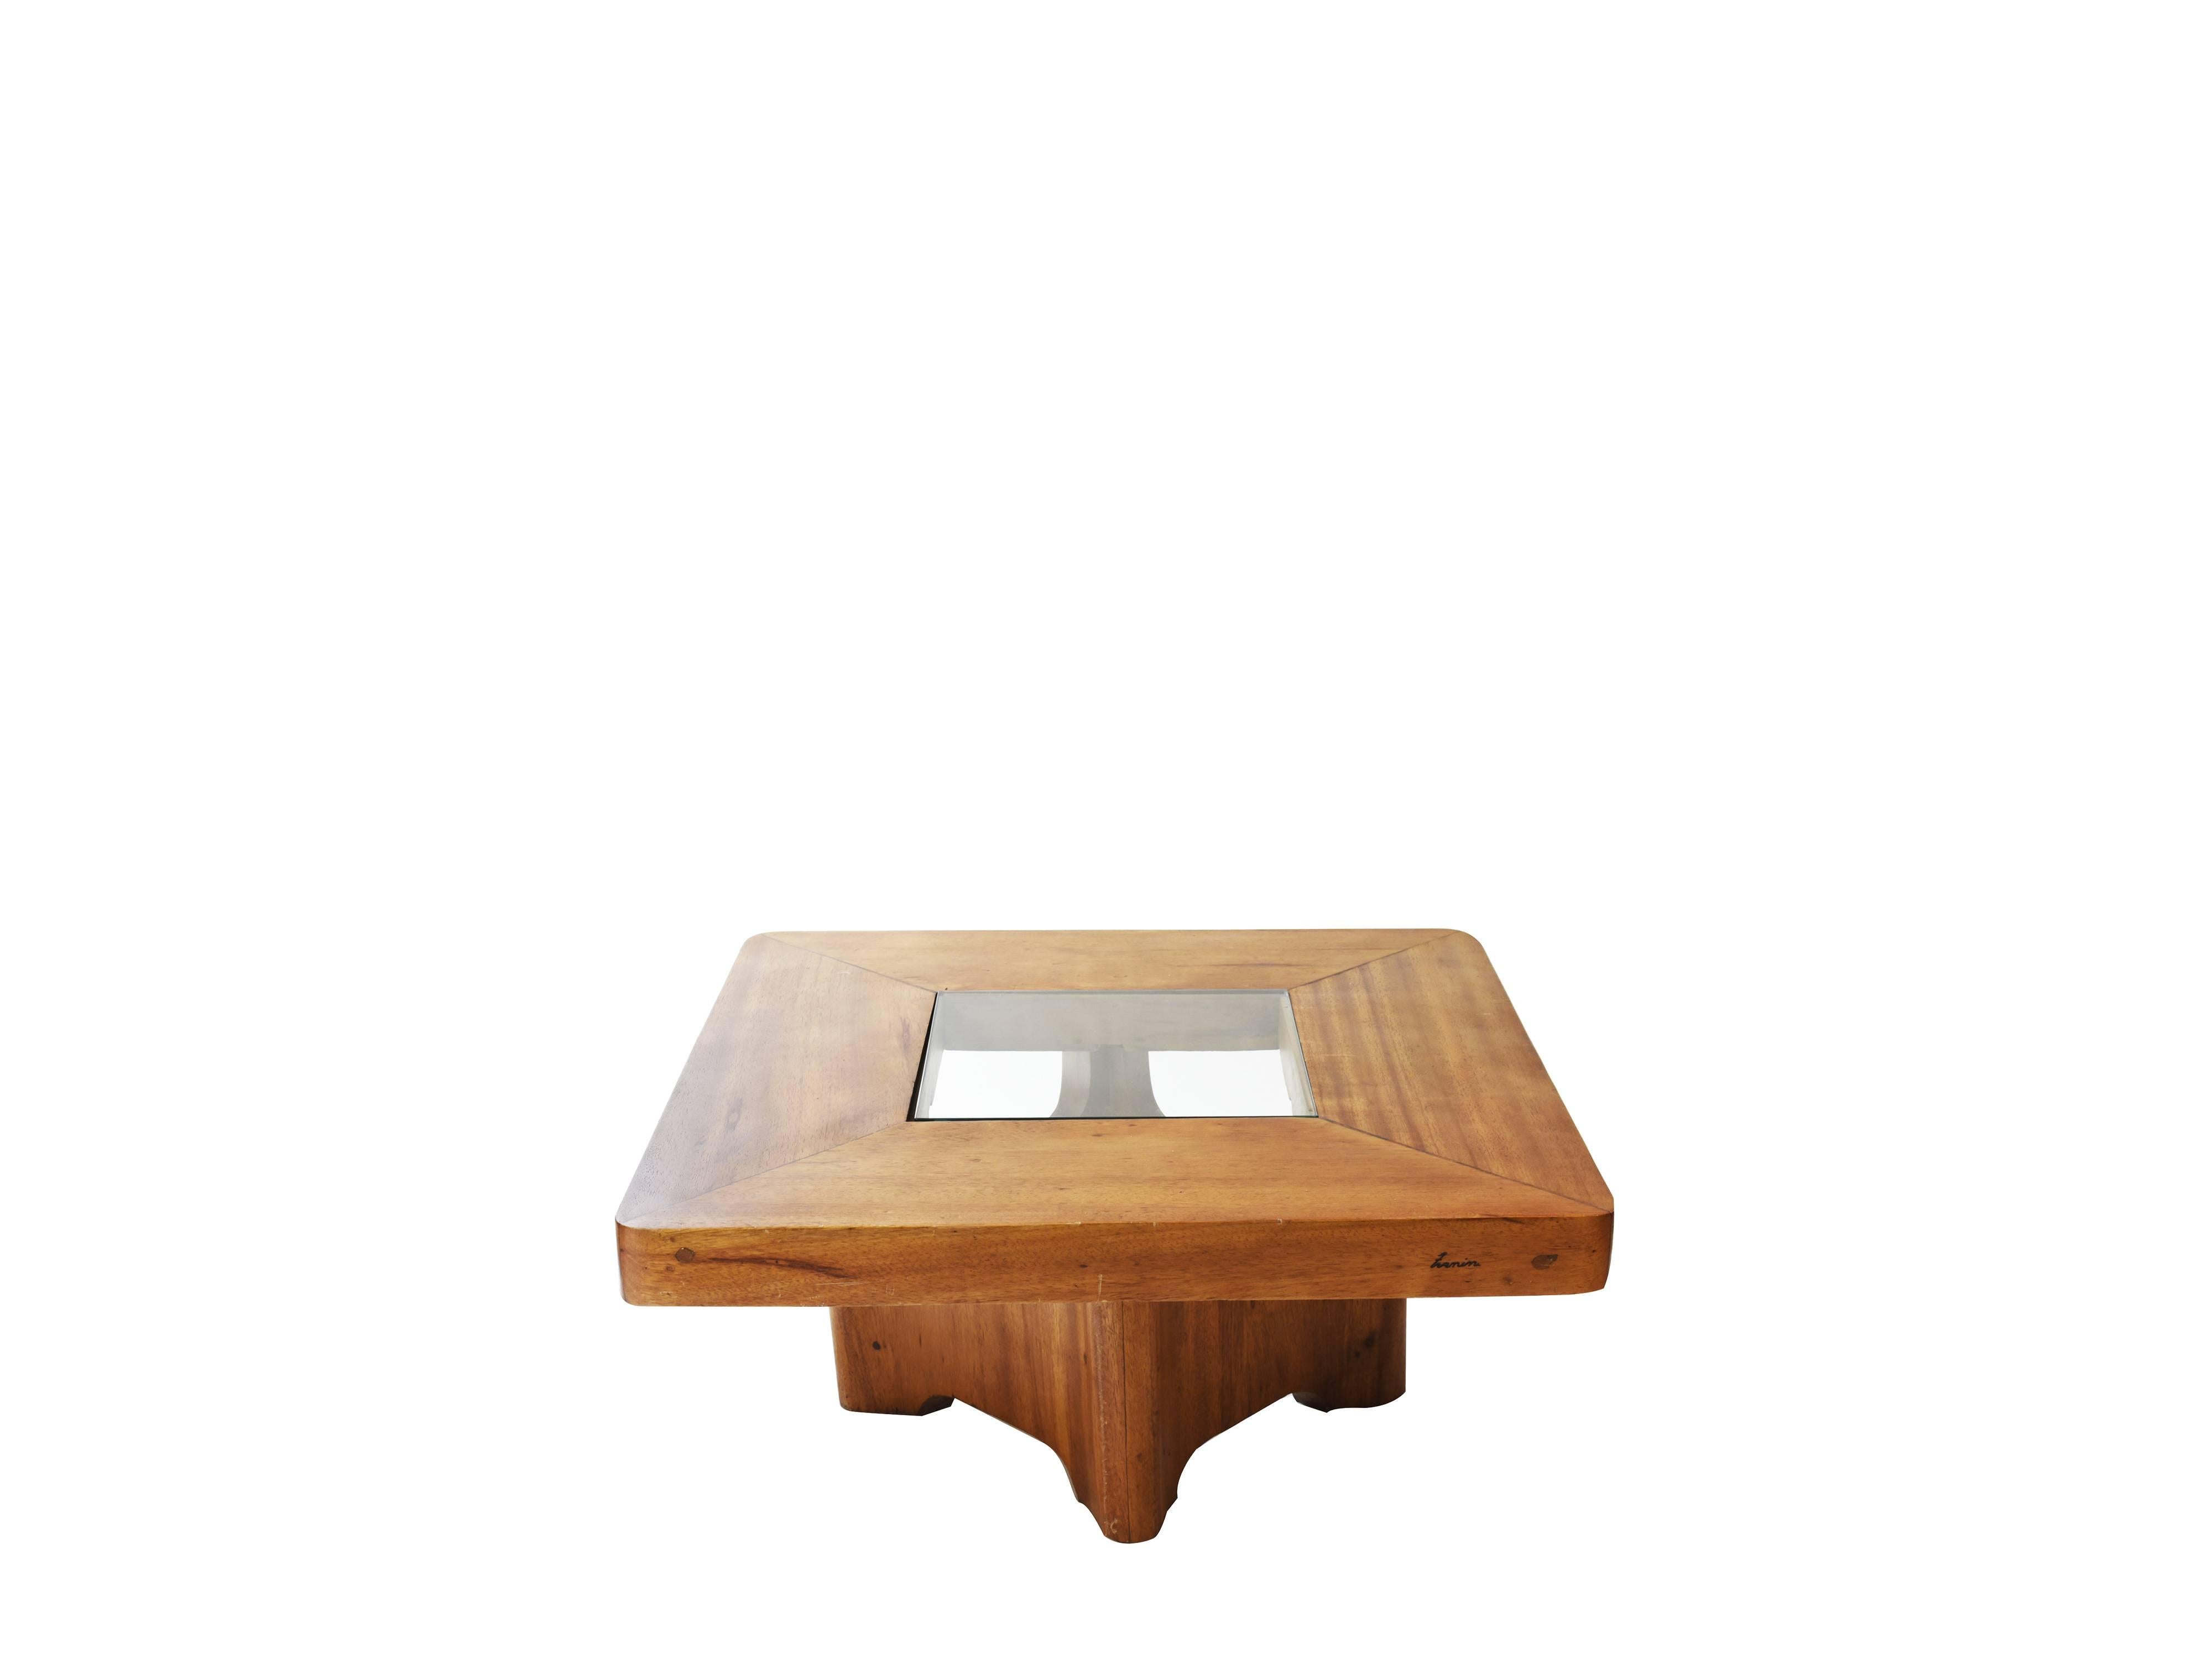 Built of hardwood, this center table is part of the phase after the closure of the Z Artistic Furniture, in which the self-taught worked with raw wood and not plywood.

Also known as 